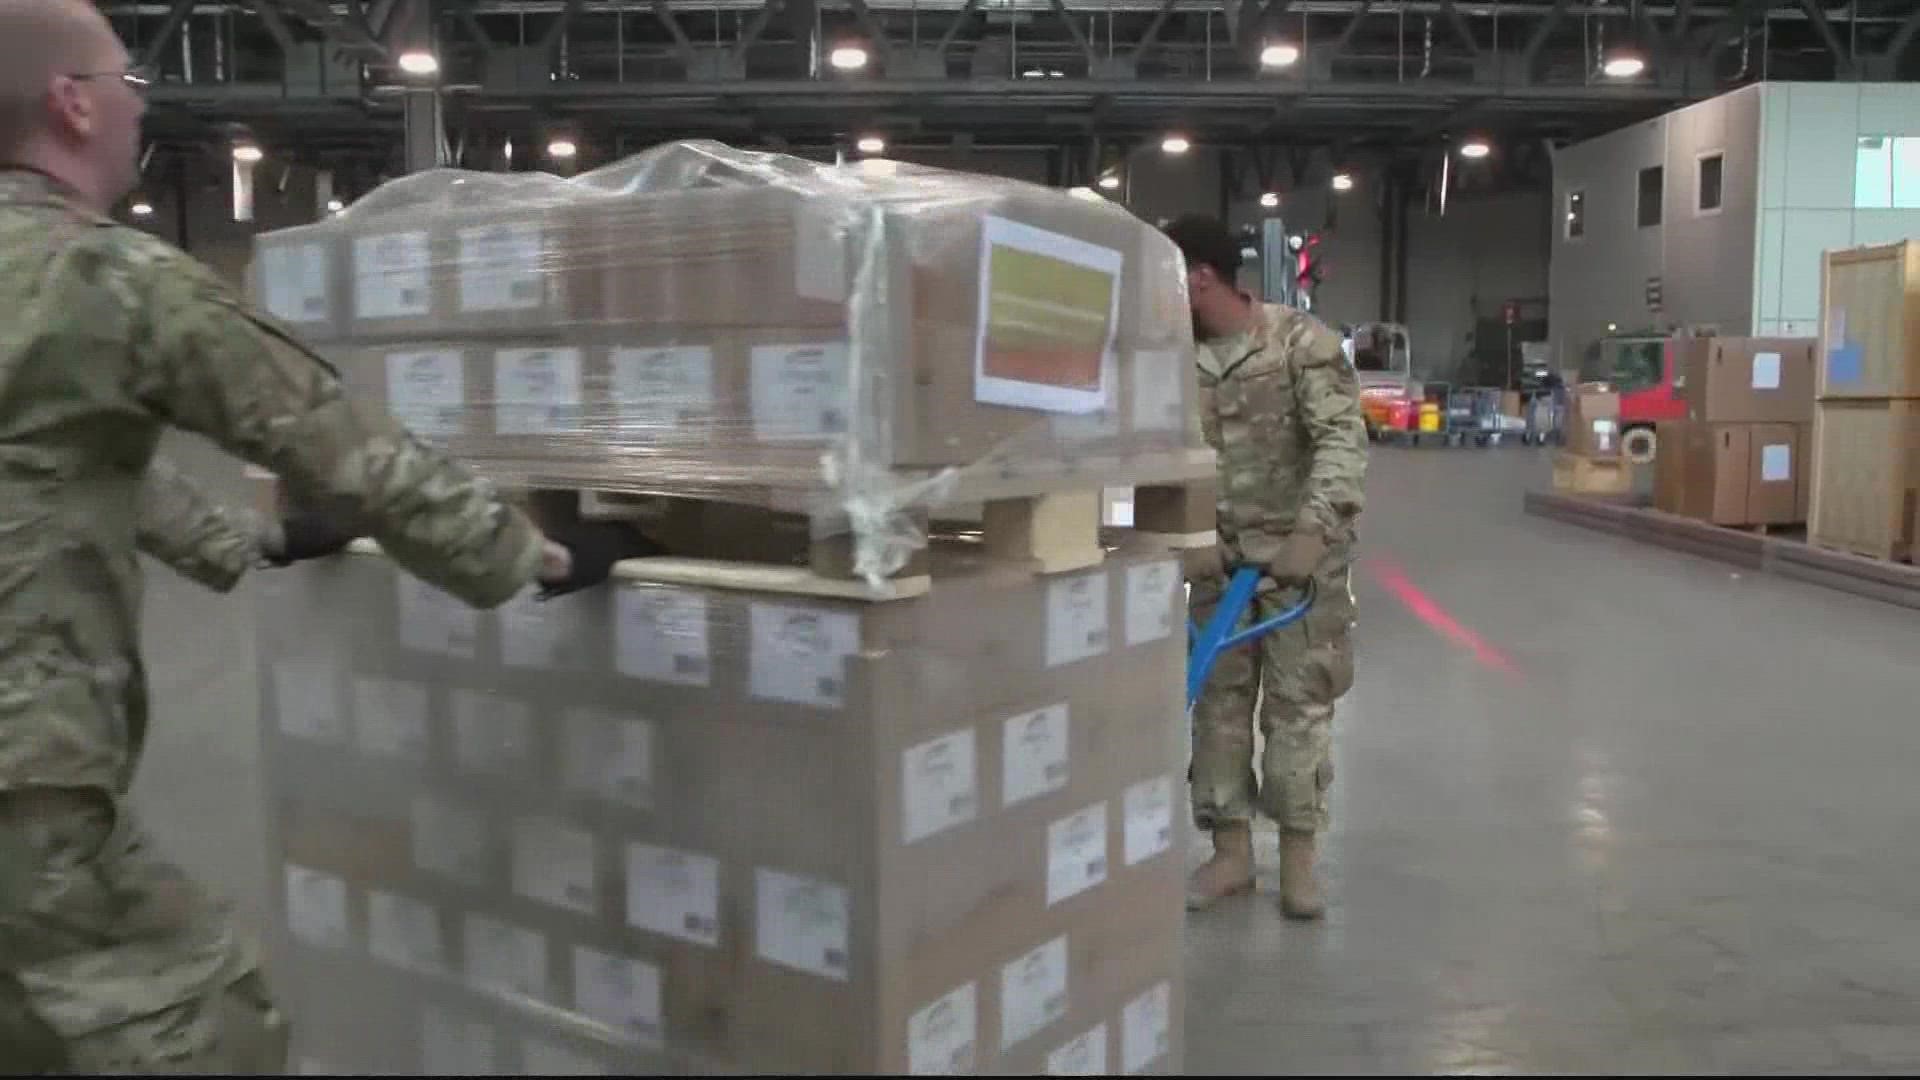 A fresh shipment is set to arrive at Dulles.